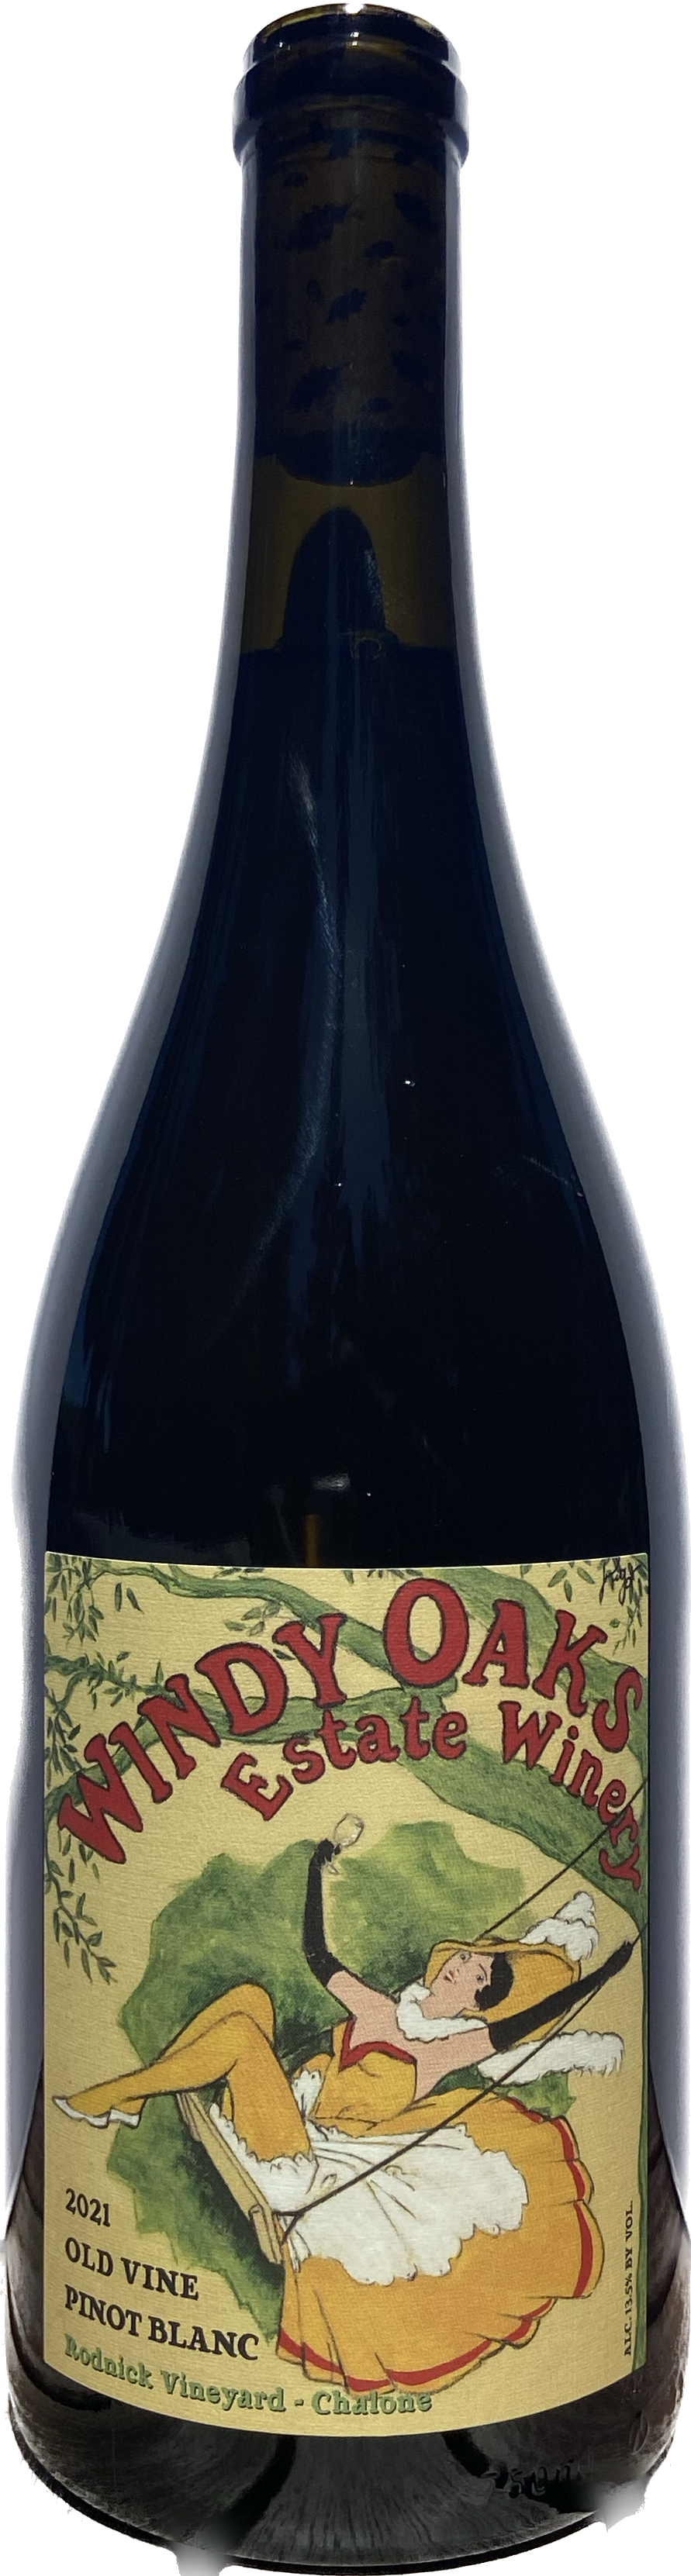 Product Image for 2021 Pinot Blanc, Chalone, Old Vine